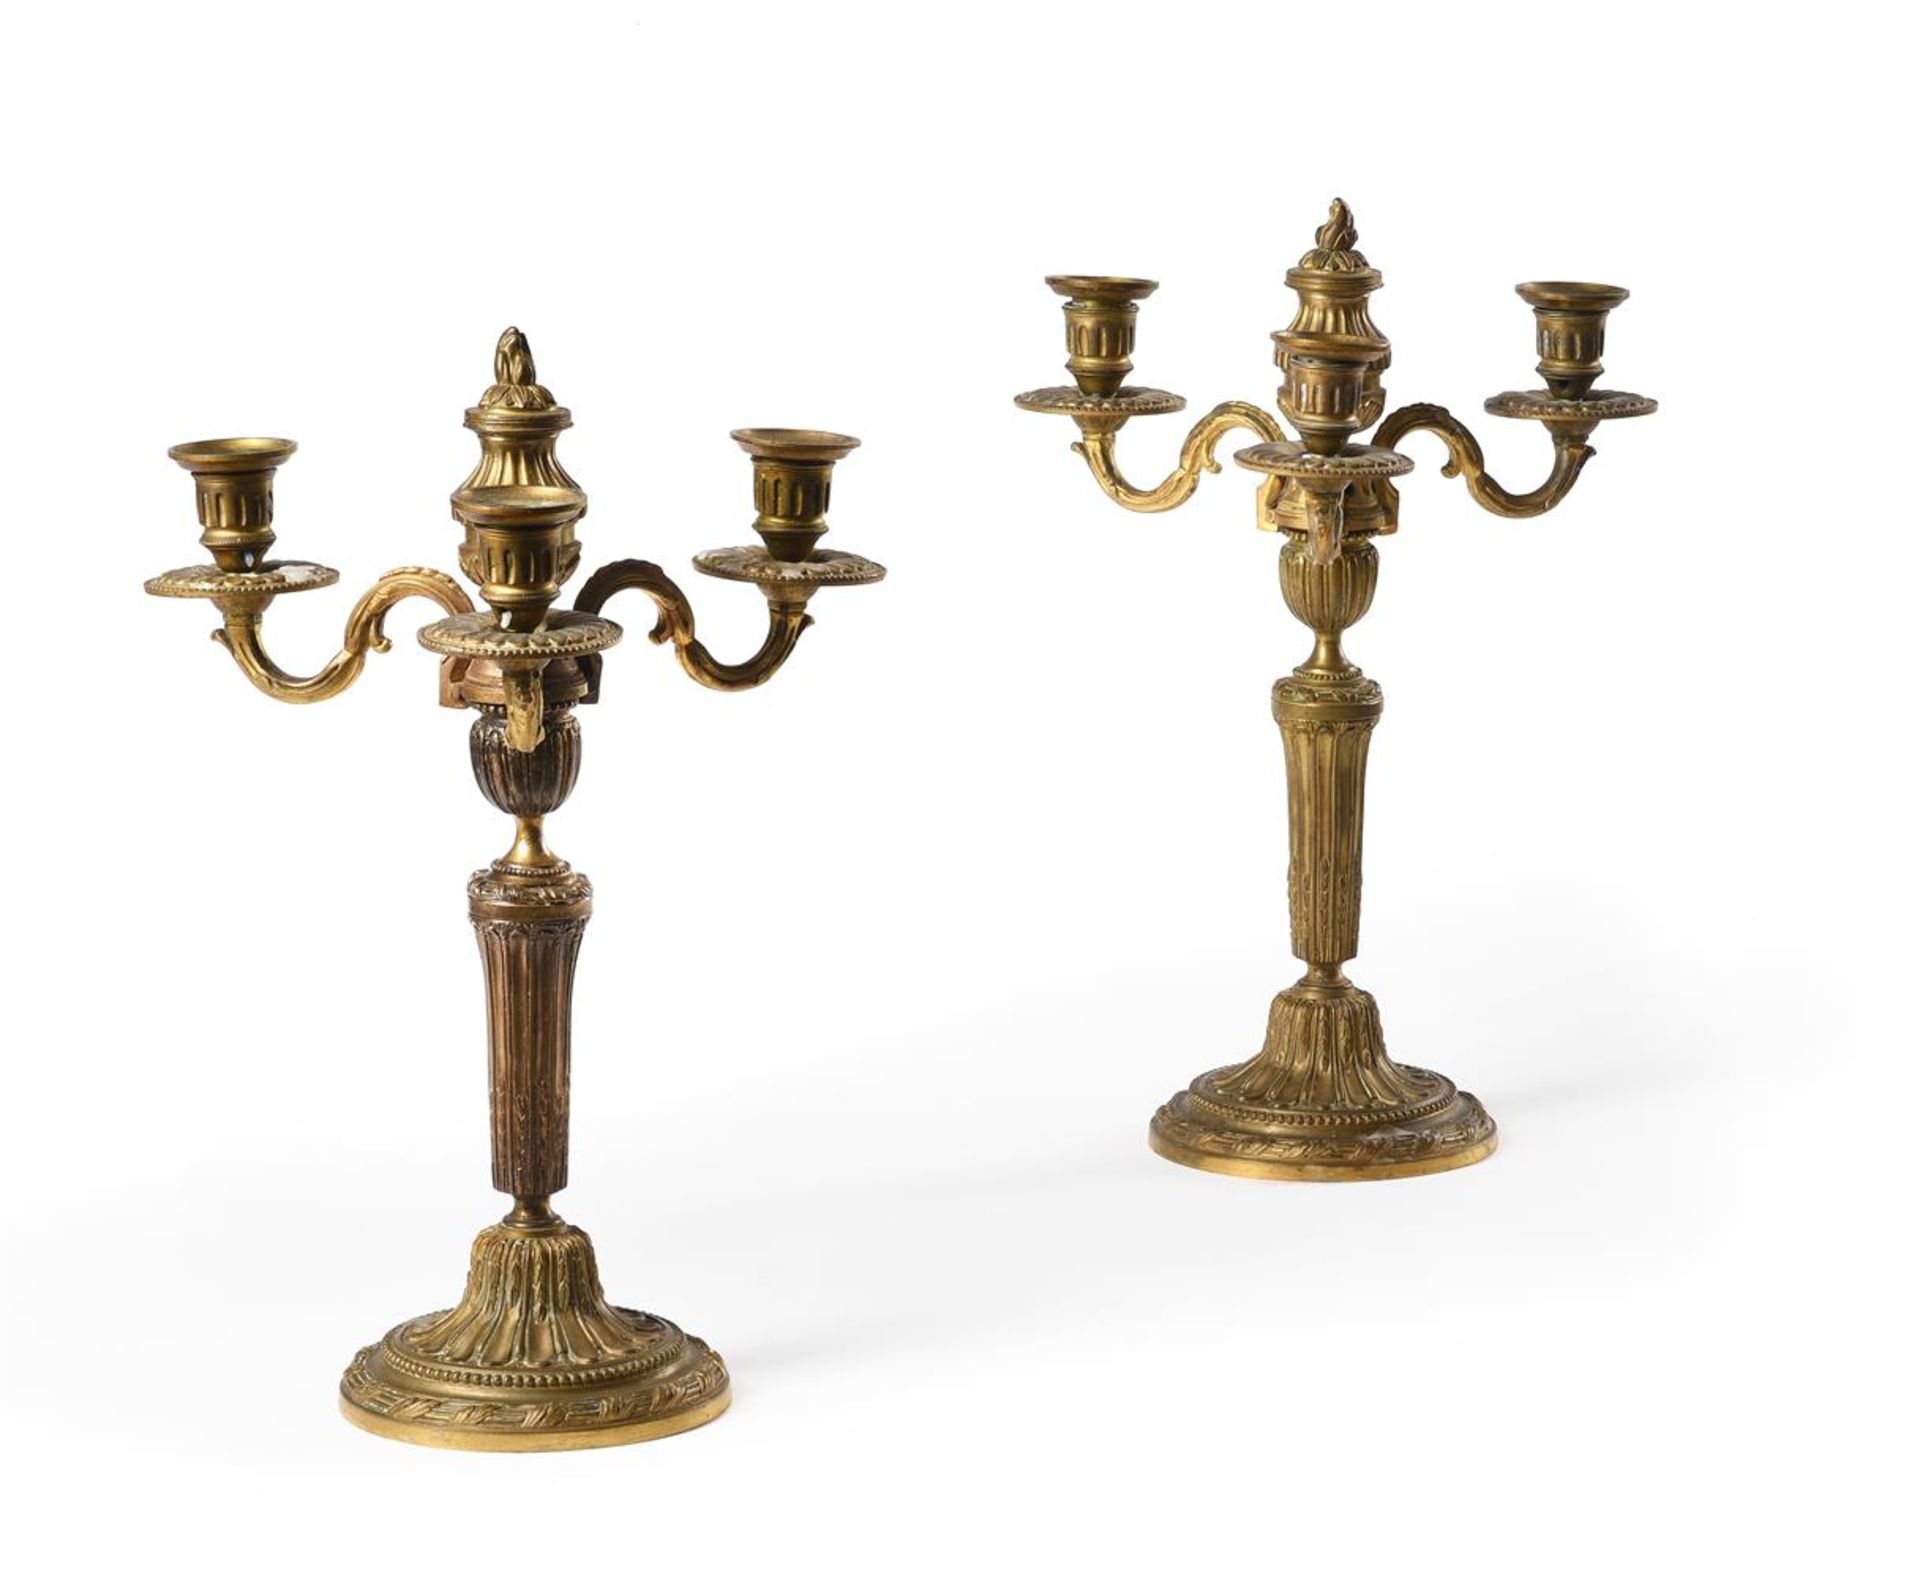 A PAIR OF FRENCH GILT BRONZE THREE LIGHT CANDLESTICKS, 18TH CENTURY AND LATER